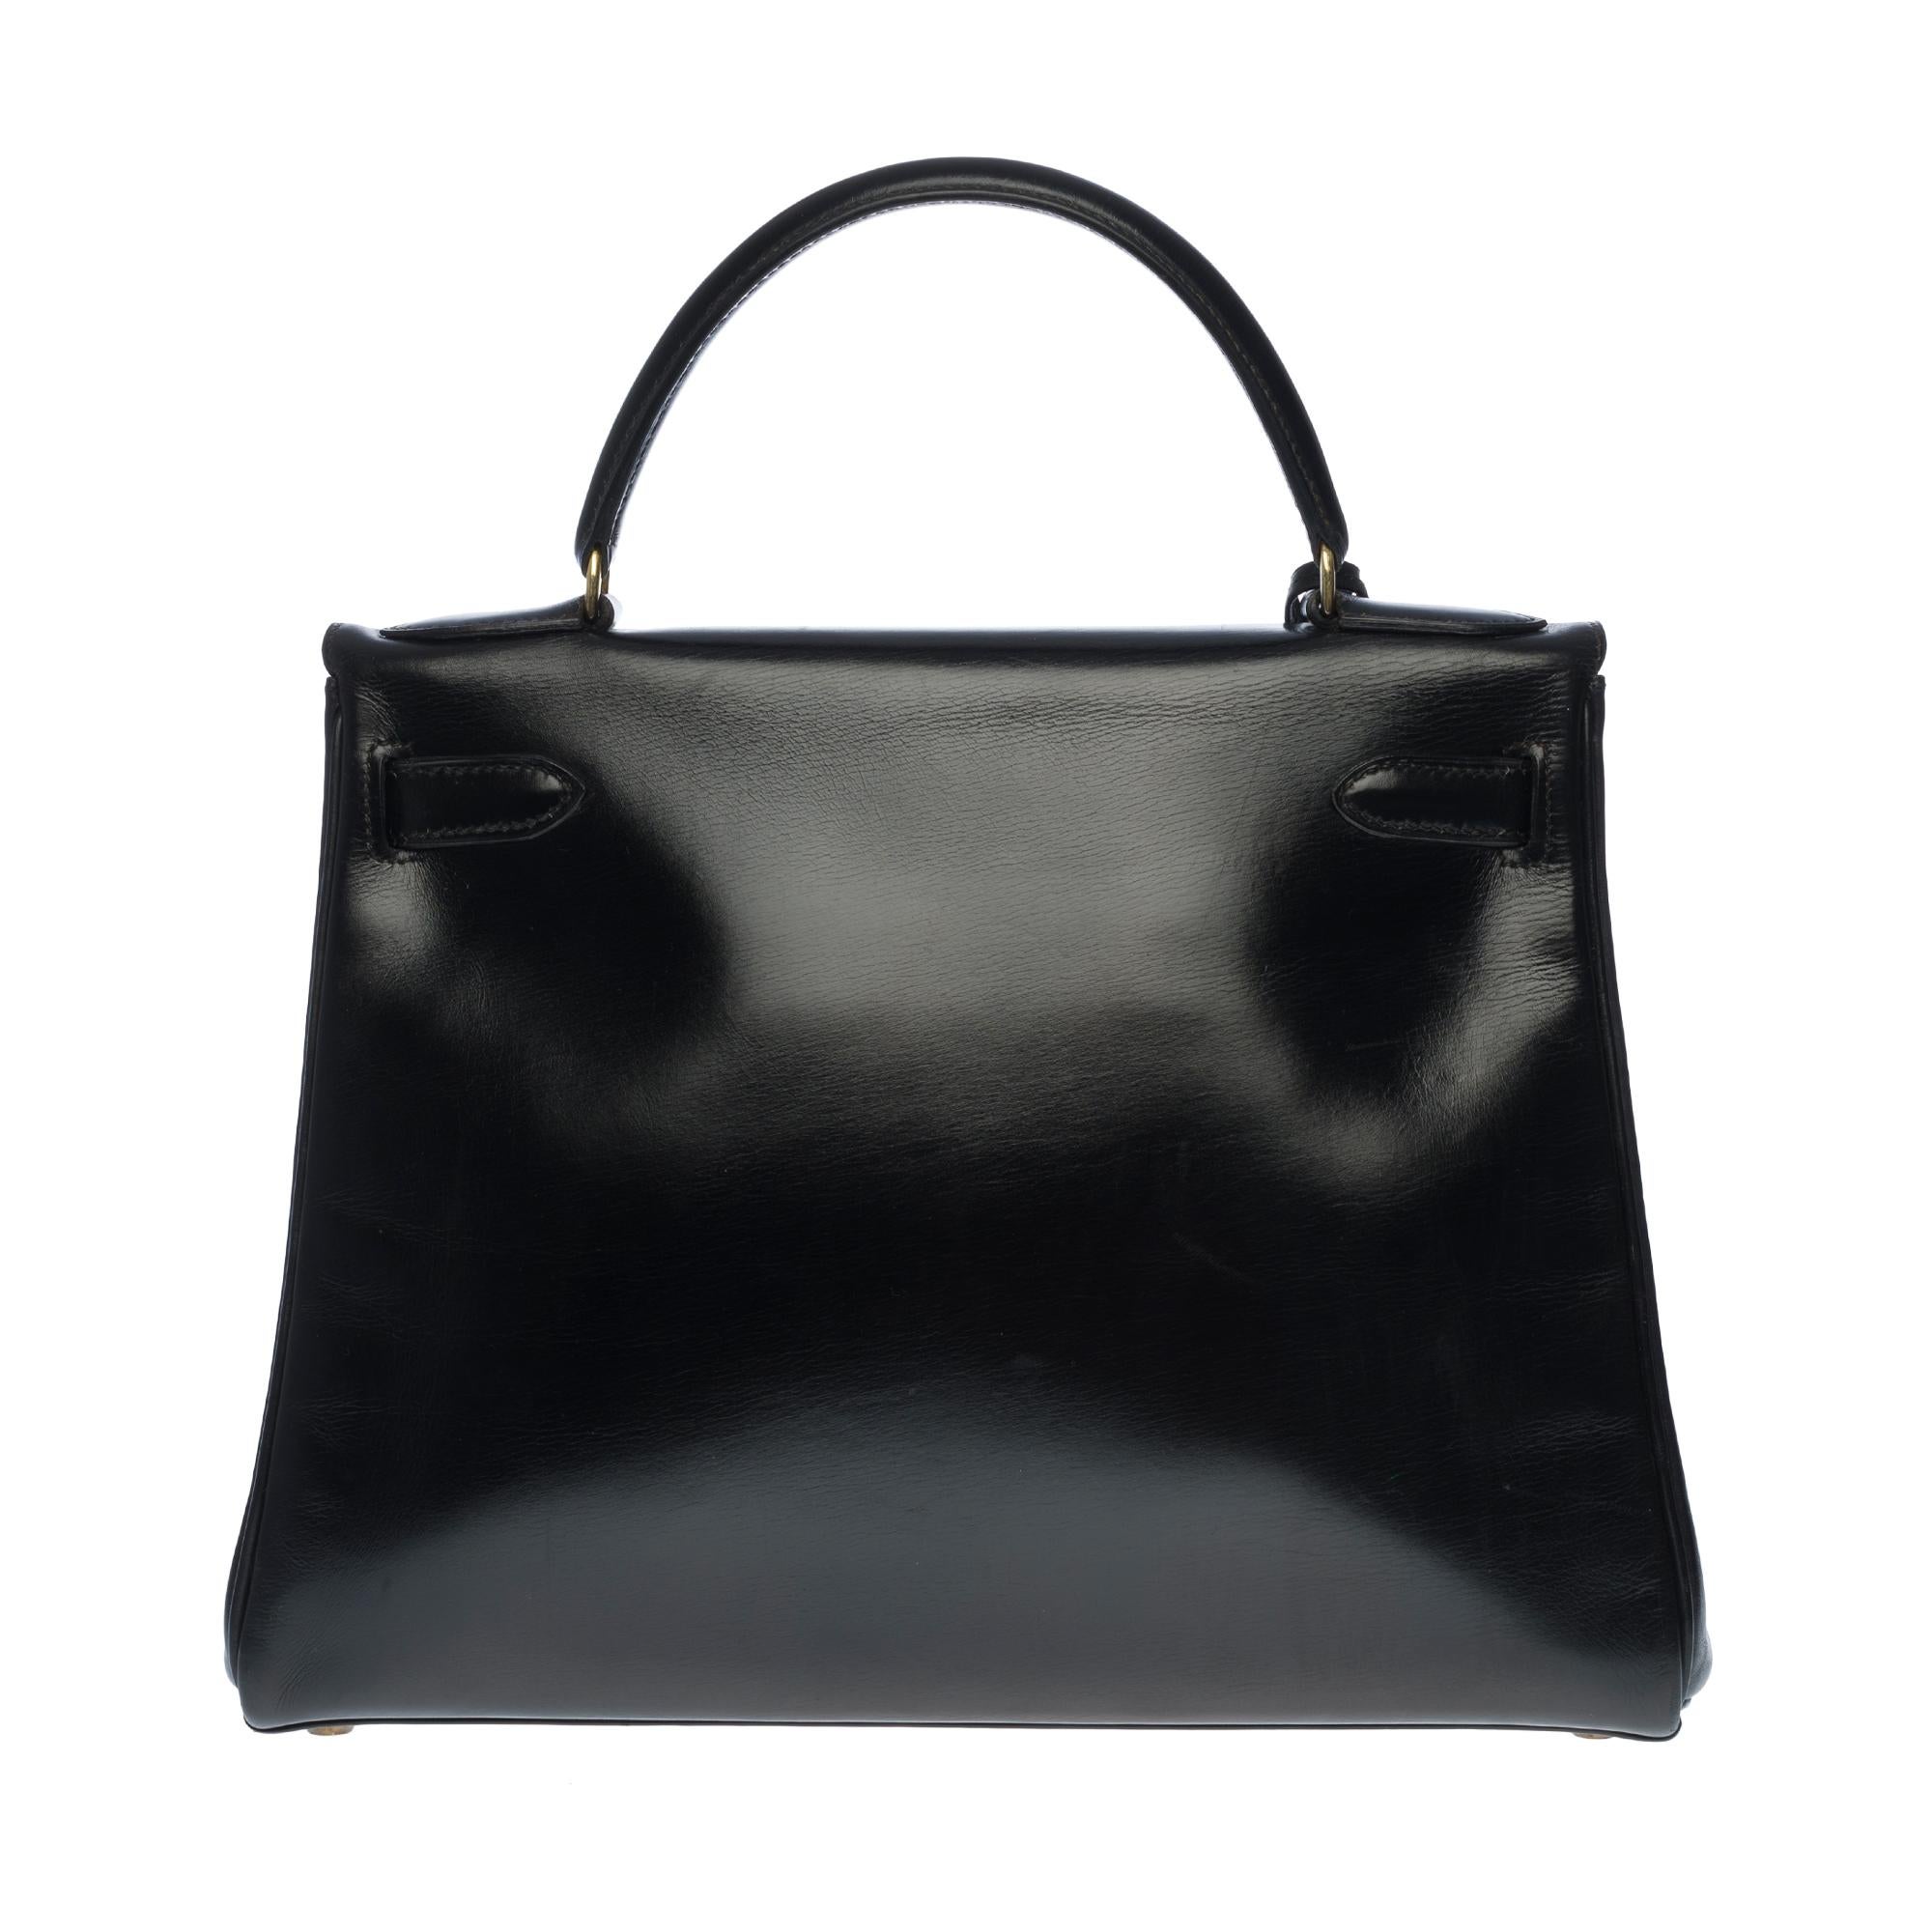 Stunning Hermes Kelly 28 black box leather handbag, gold-plated metal hardware, simple black box leather handle, shoulder strap handle (not signed Hermès) in black box allowing a hand or shoulder strap.

Closure by flap.
Lining in black leather, a